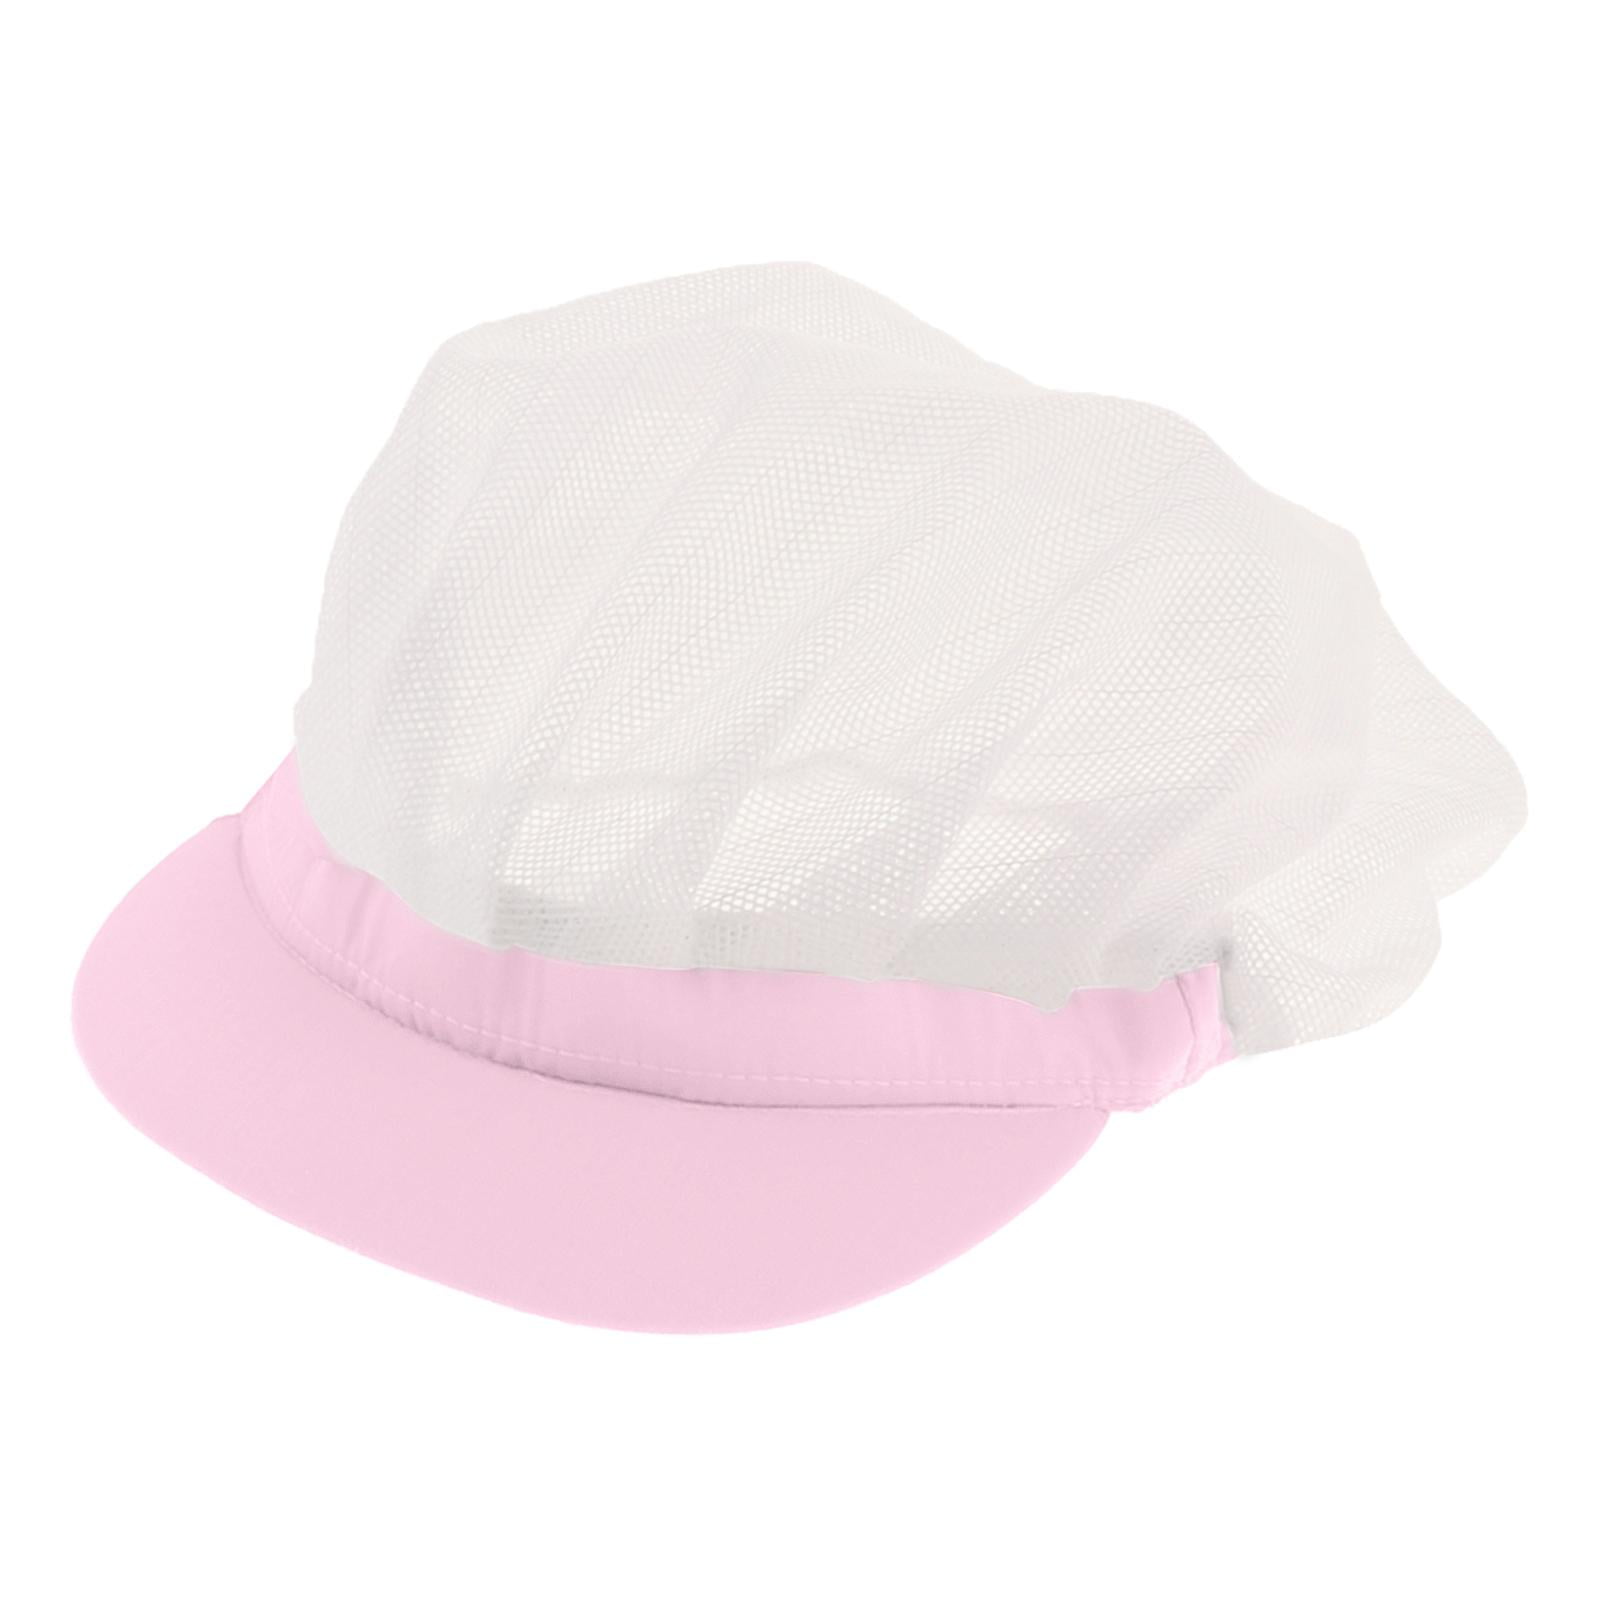 Pink Chef Hat Adjustable By BEAUTIFUL Fits Adults-Teens Home & Kitchen 